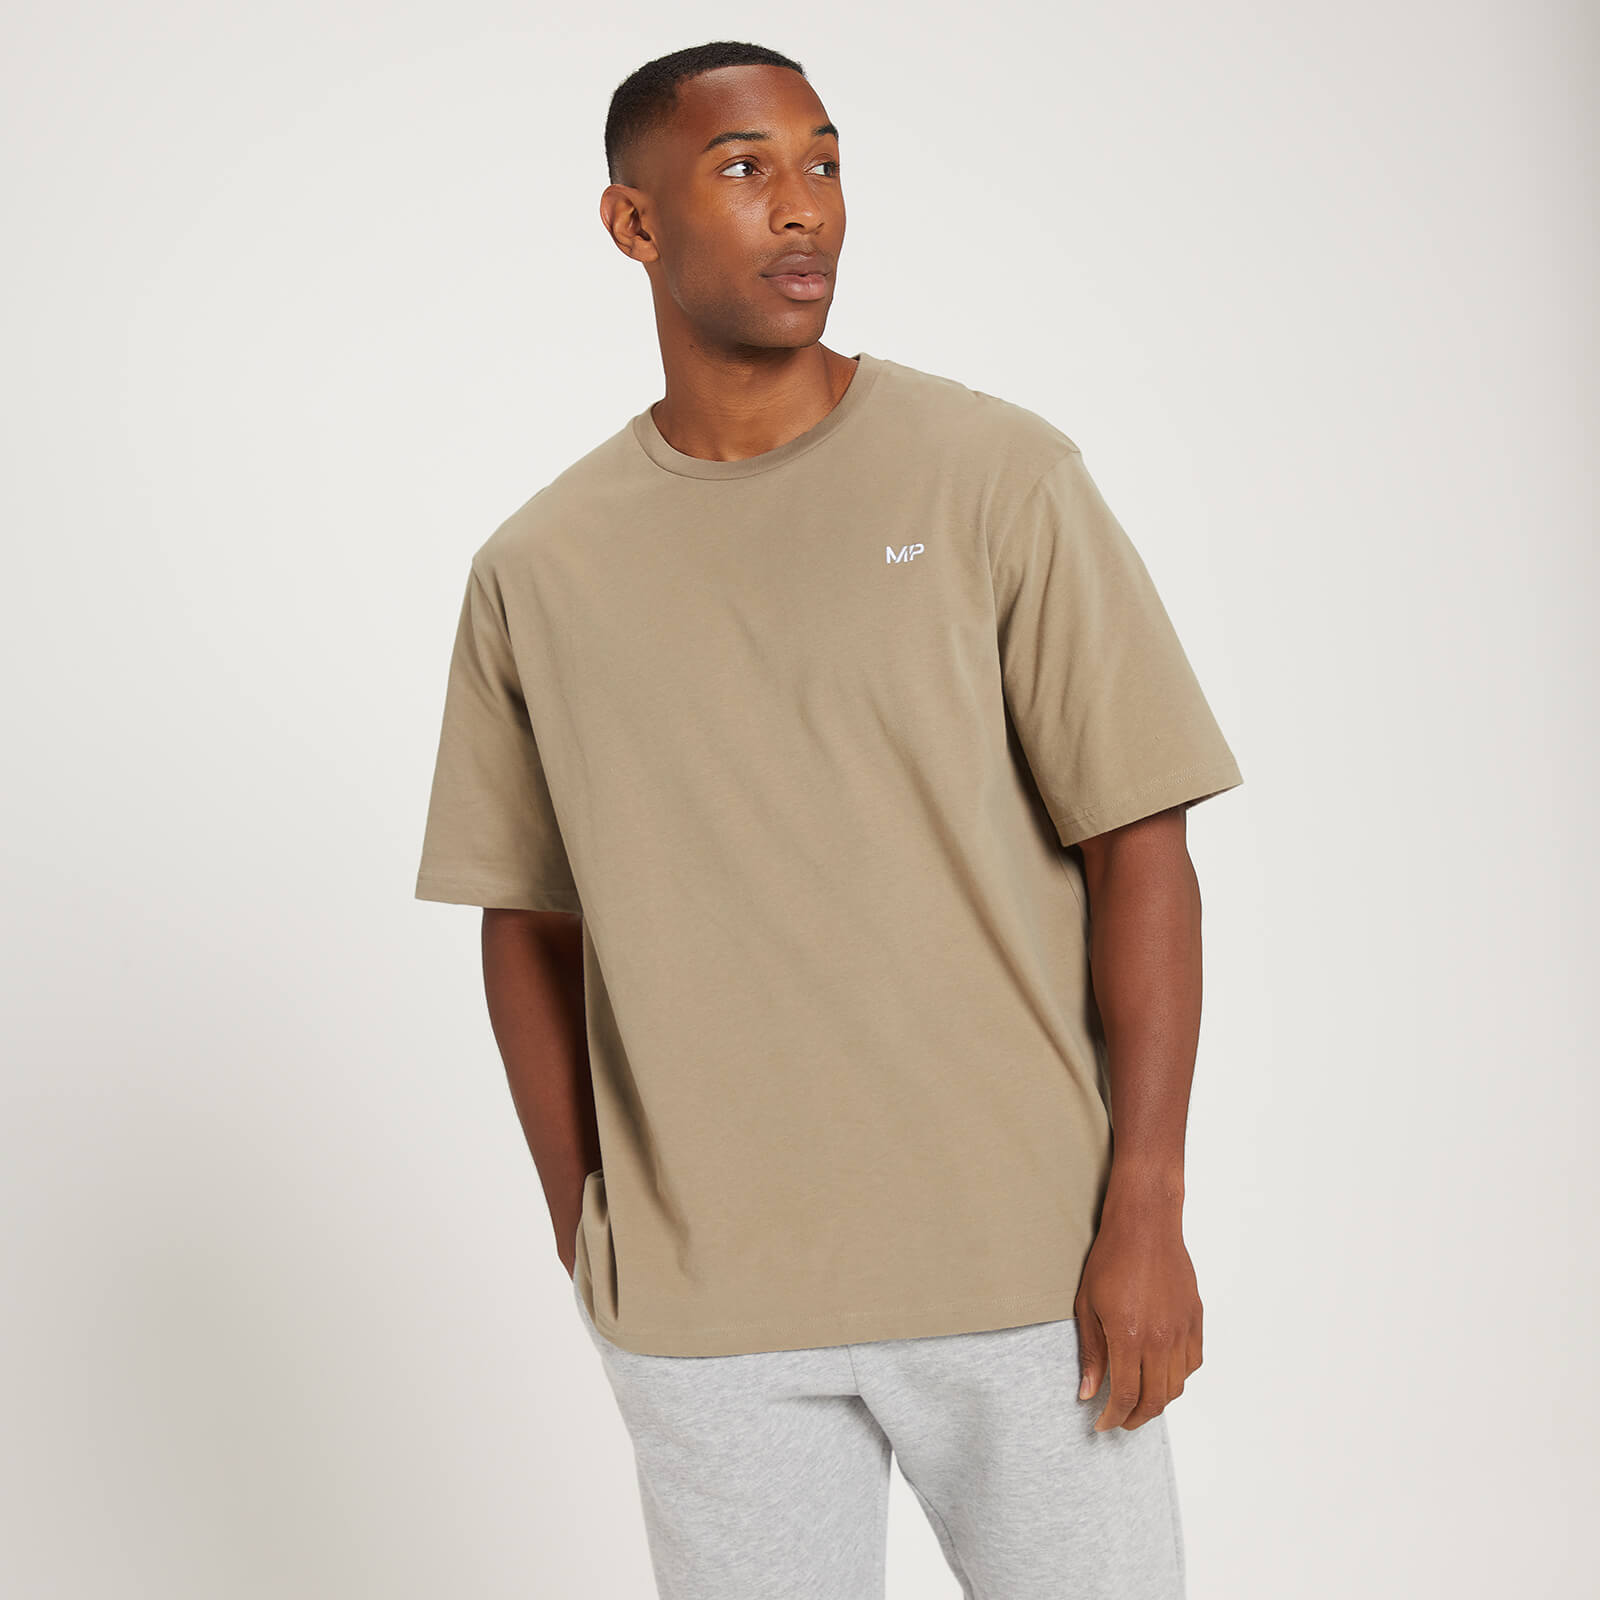 MP Men's Oversized T-Shirt - Taupe - M